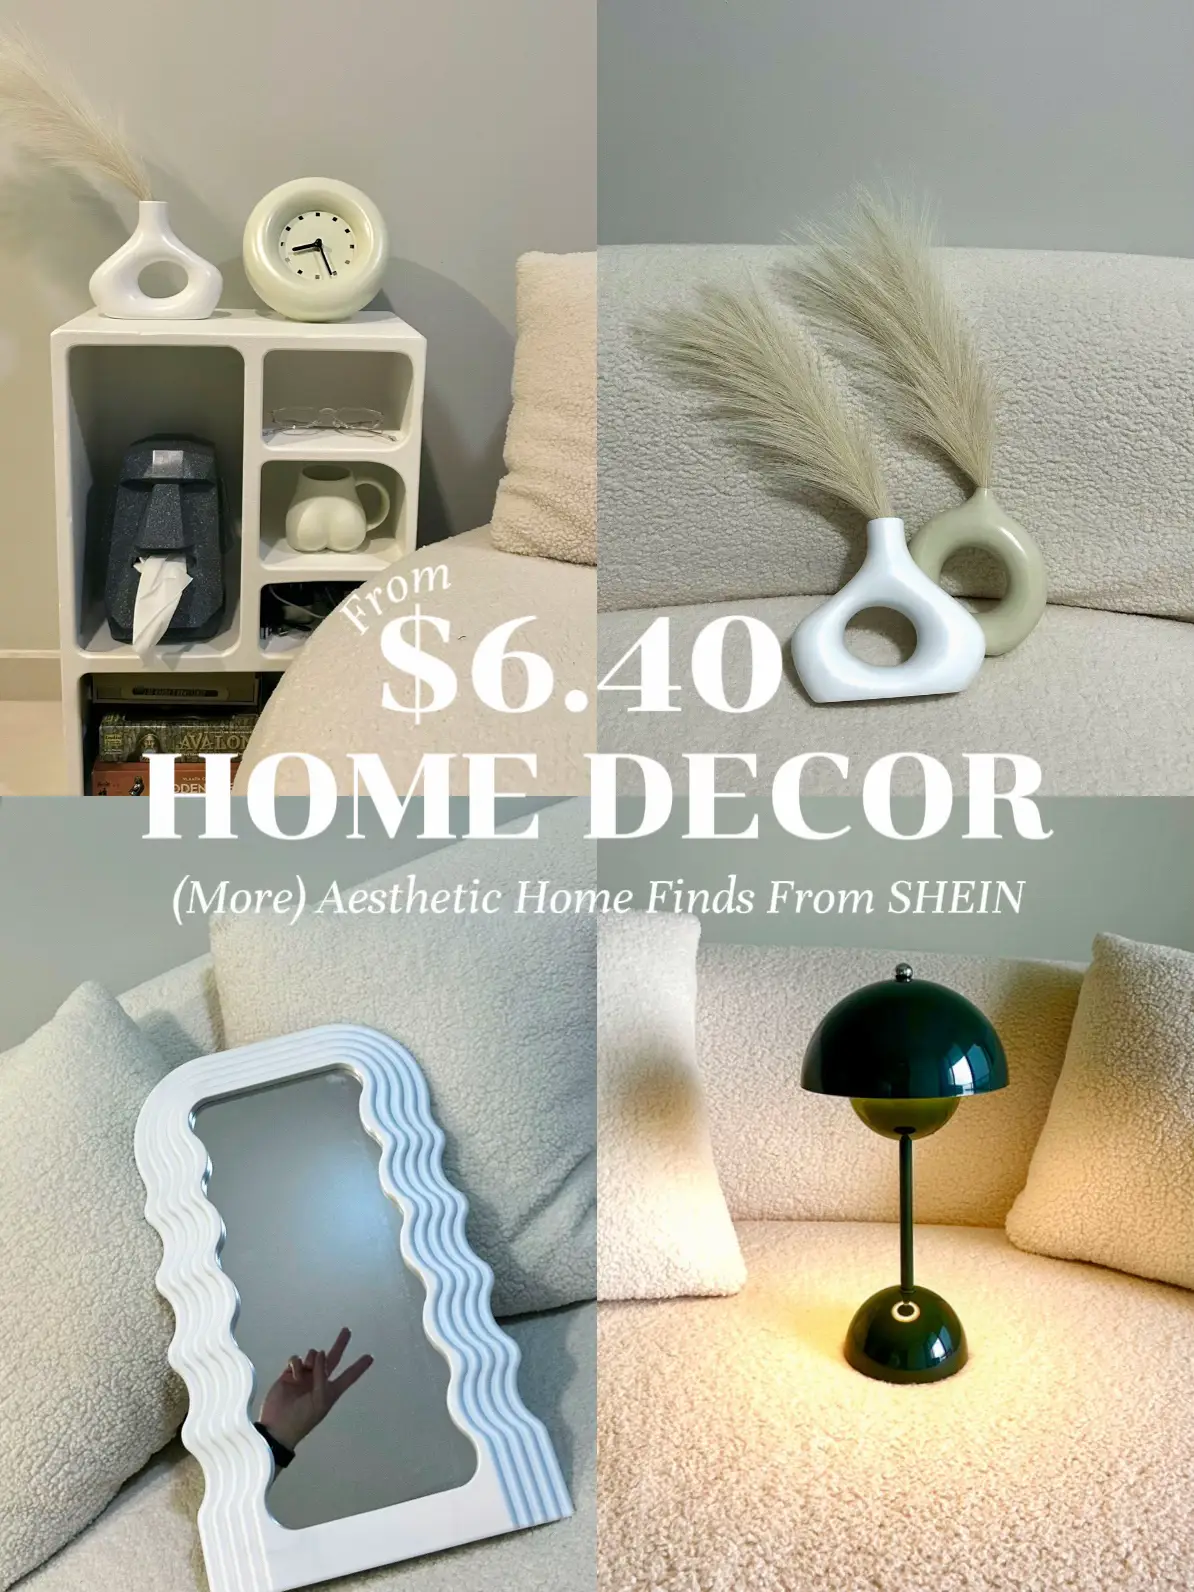 $6.40 Aesthetic Home Decor Finds?!? RUN💨's images